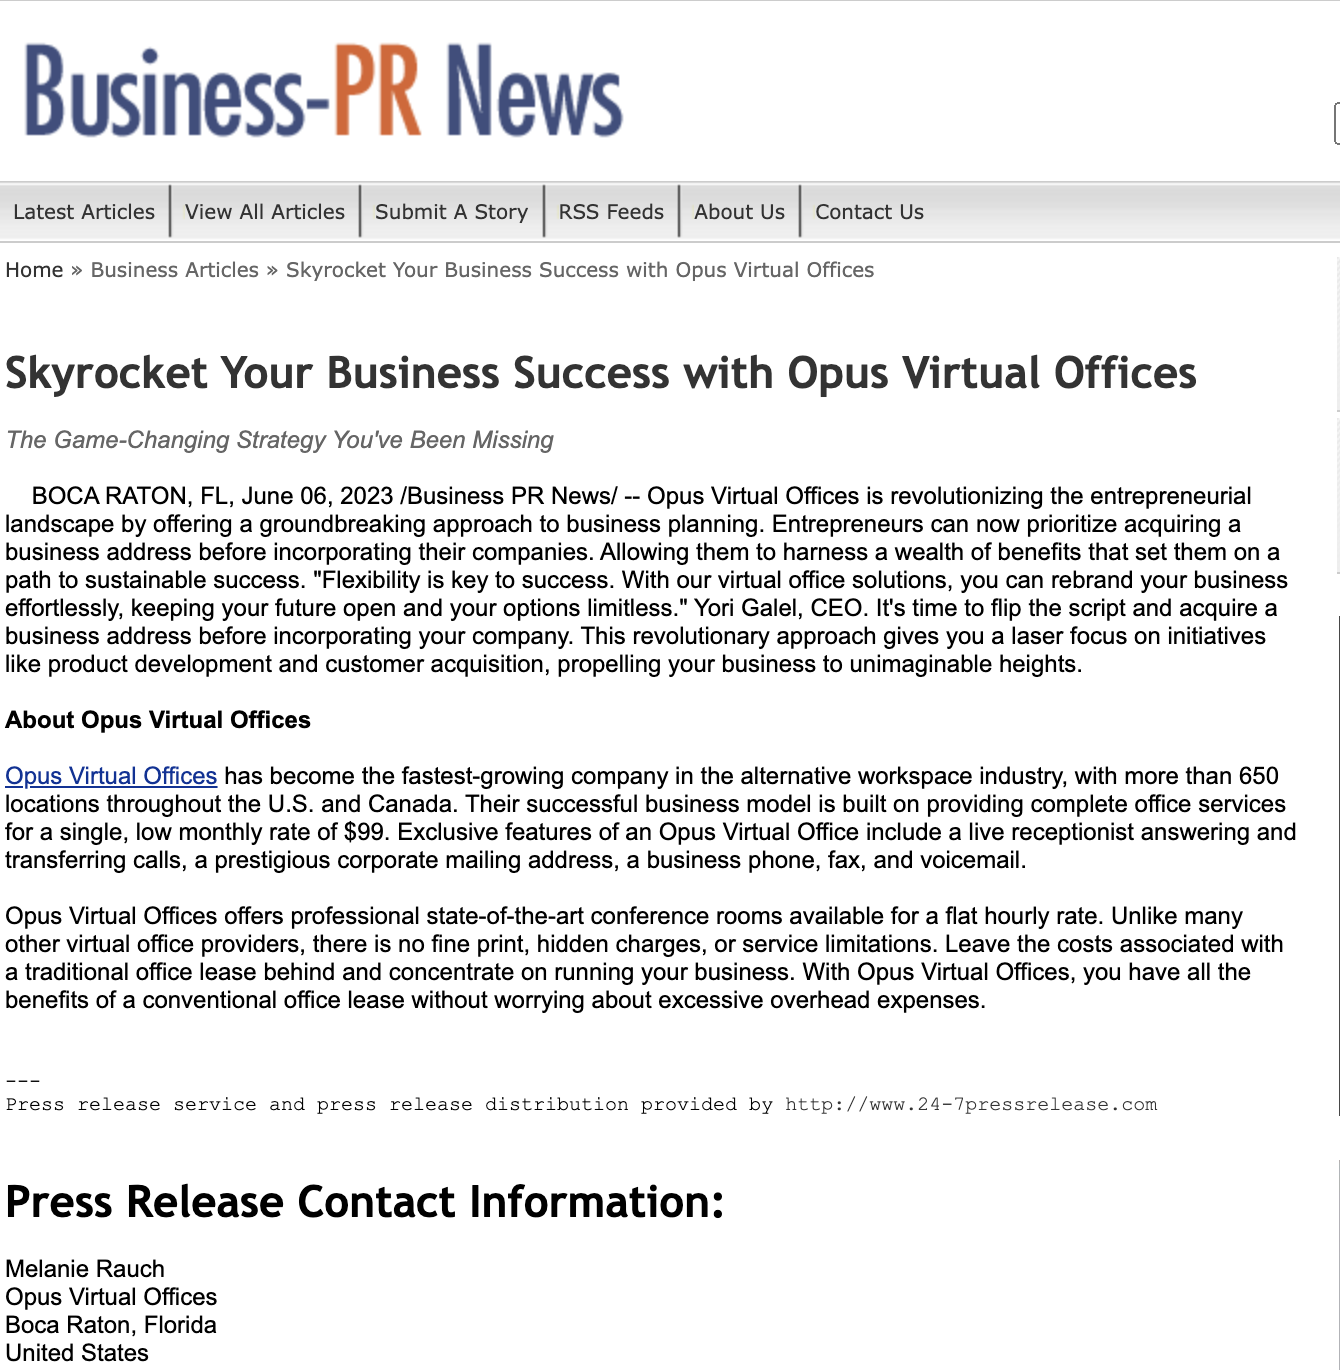 Skyrocket Your Business Success with Opus Virtual Offices